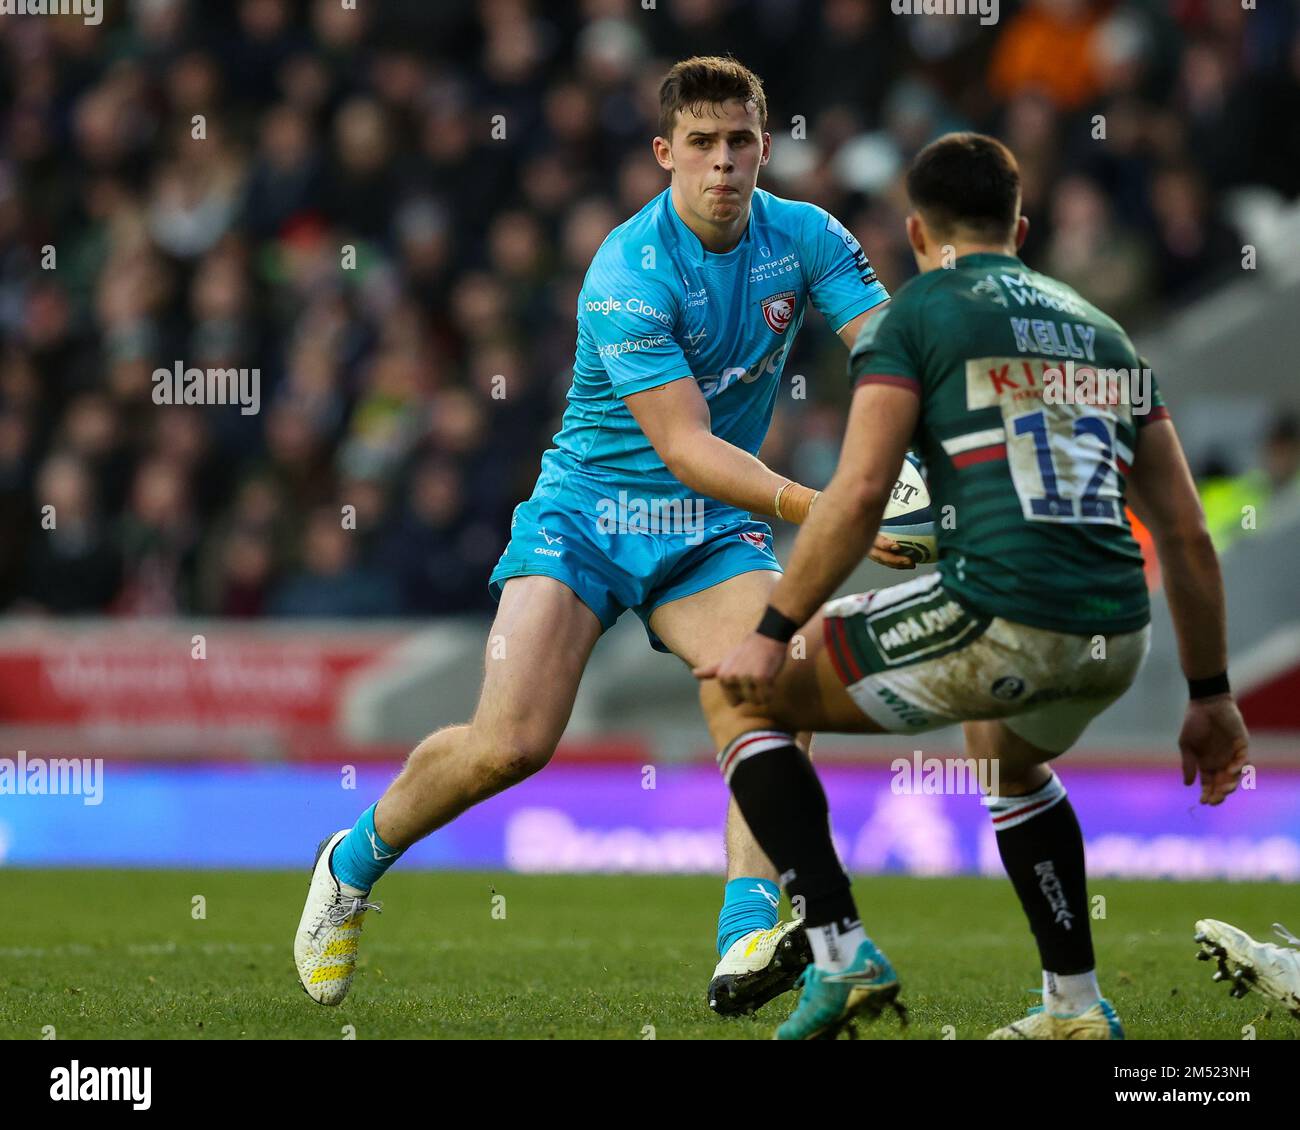 Seb Atkinson of Gloucester Rugby is confronted by Dan Kelly of Leicester Tigers during the Gallagher Premiership match Leicester Tigers vs Gloucester Rugby at Welford Road, Leicester, United Kingdom, 24th December 2022  (Photo by Nick Browning/News Images) Stock Photo